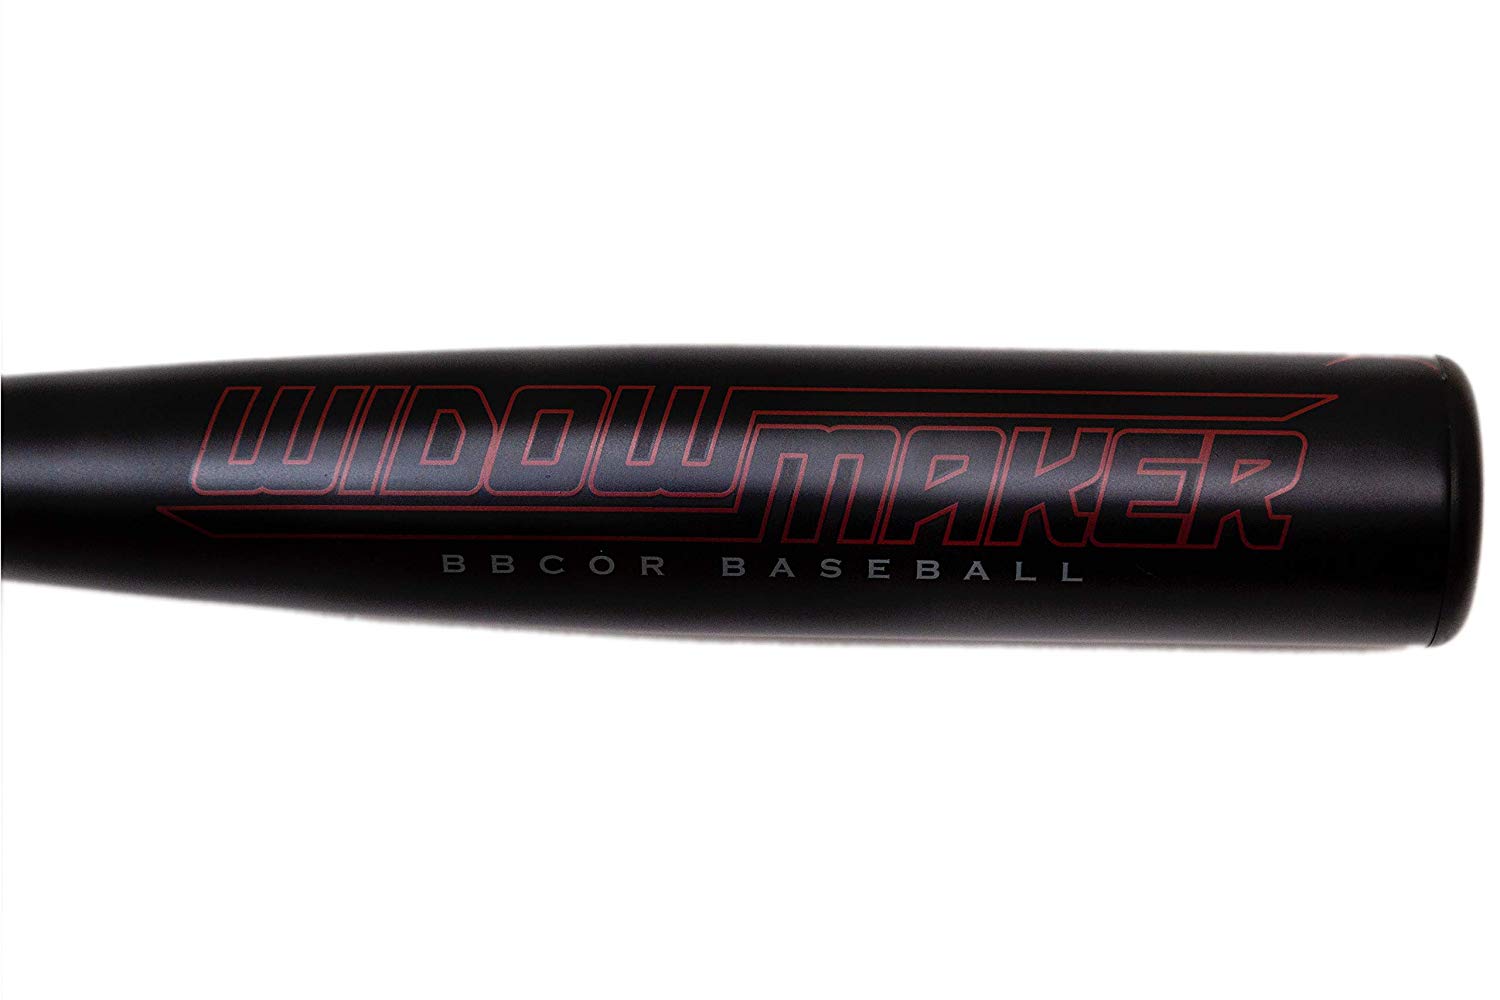 2 5/8” Barrel -3 Drop Weight Enhanced one-piece aerospace alloy design for the largest sweet spot in the industry BBCOR Certified. Put fear in the pitcher's heart with the black-as-night WidowMaker BBCOR baseball bat. Our new BBCOR model has no flashy graphics, just a dark intimidating black barrel with dark red graphics including a spider on a single line of web. Your opponents won't know what hit 'em. The one-piece ultra-balanced design offers Military Tank like durability so you’ll never have to worry about breaking the bat with normal usage in games and practice. We’ve packed as much weight in the sweet spot to create huge exit speed when you make contact with your WidowMaker BBCOR…. while still giving you absolute bat control to wait on any off speed pitch. widowmaker back Balanced & Intimidating 2 5/8” Barrel -3 Drop Weight Ultra-Thin Whip Handle for better bat speed Enhanced one-piece aerospace alloy design for the largest sweet spot in the industry Balanced feel for better control and power through the hitting zone Hot out of the wrapper, no “break-in” period necessary Certified high response aerospace alloy material BBCOR Certified Approved for all high school and collegiate play Model #: 014018